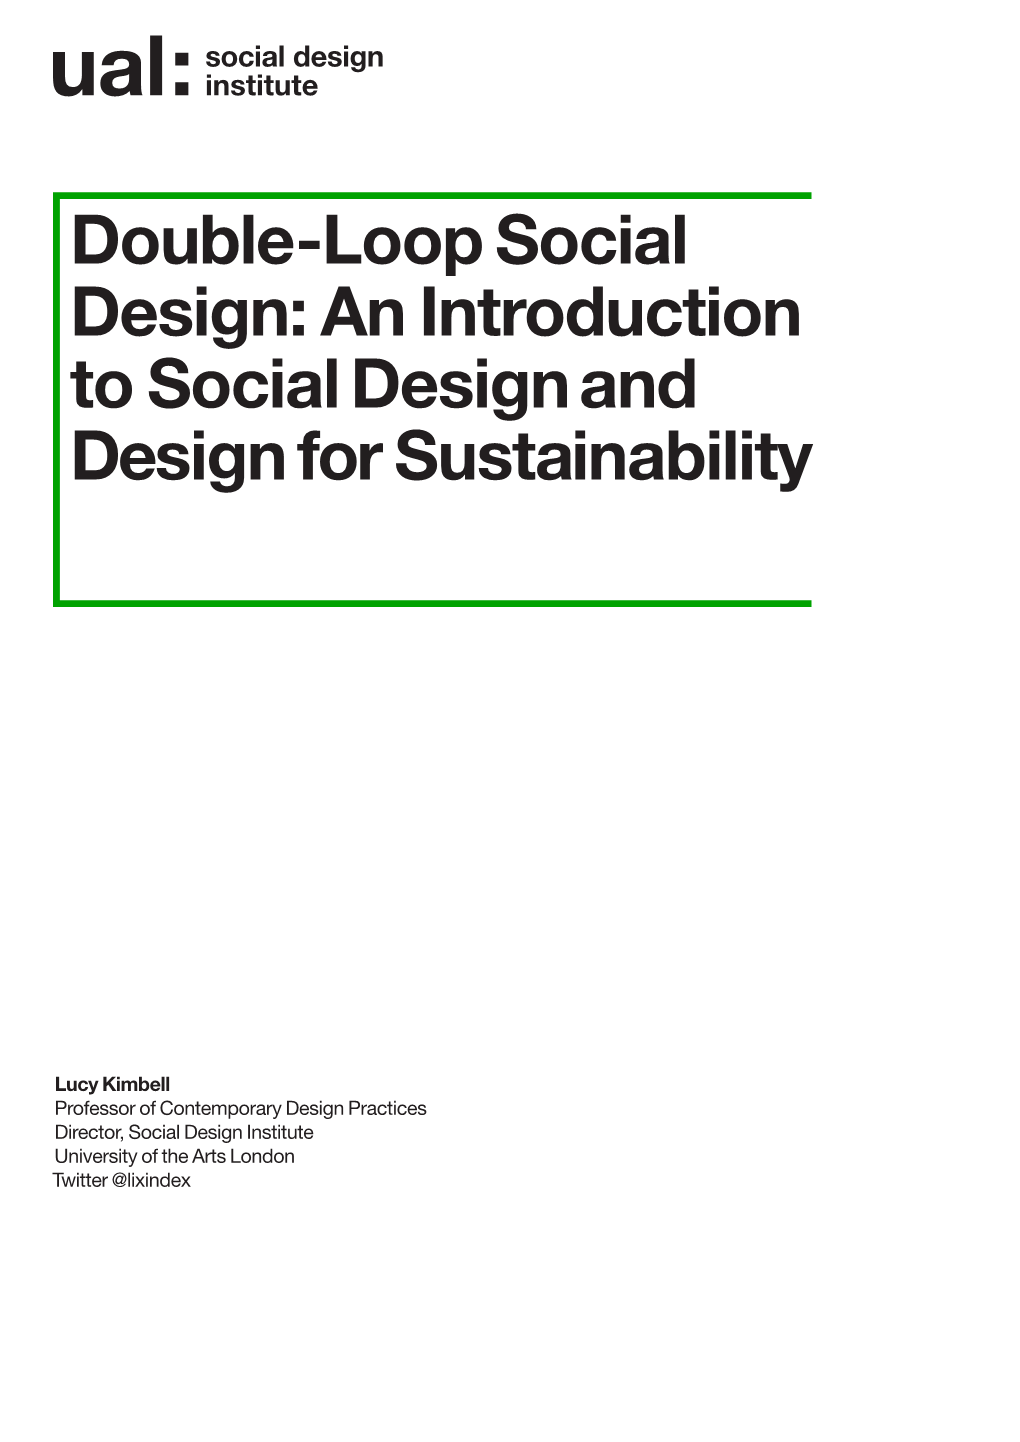 An Introduction to Social Design and Design for Sustainability